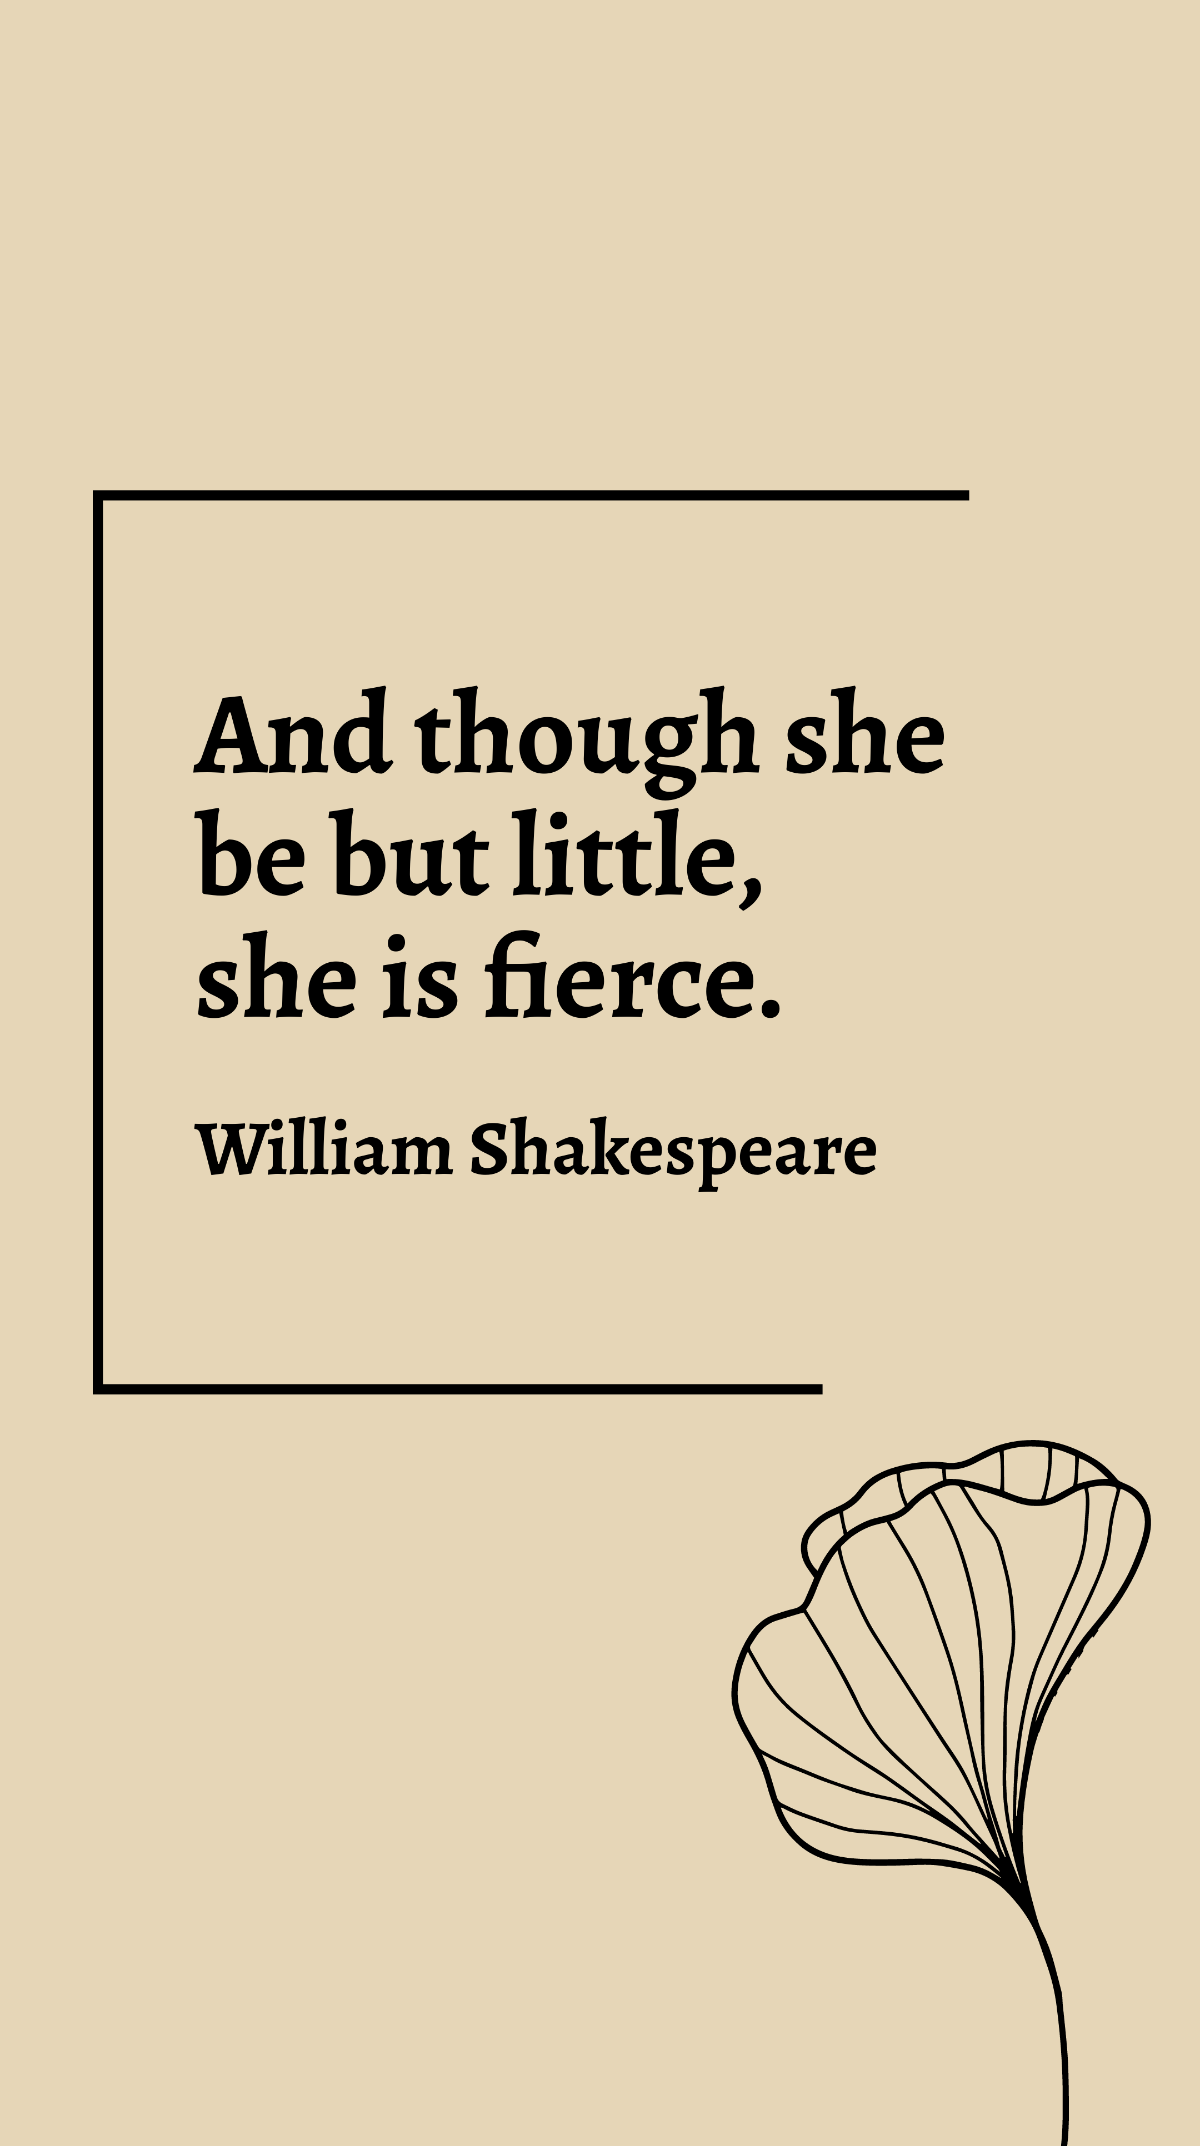 William Shakespeare - And though she be but little, she is fierce.